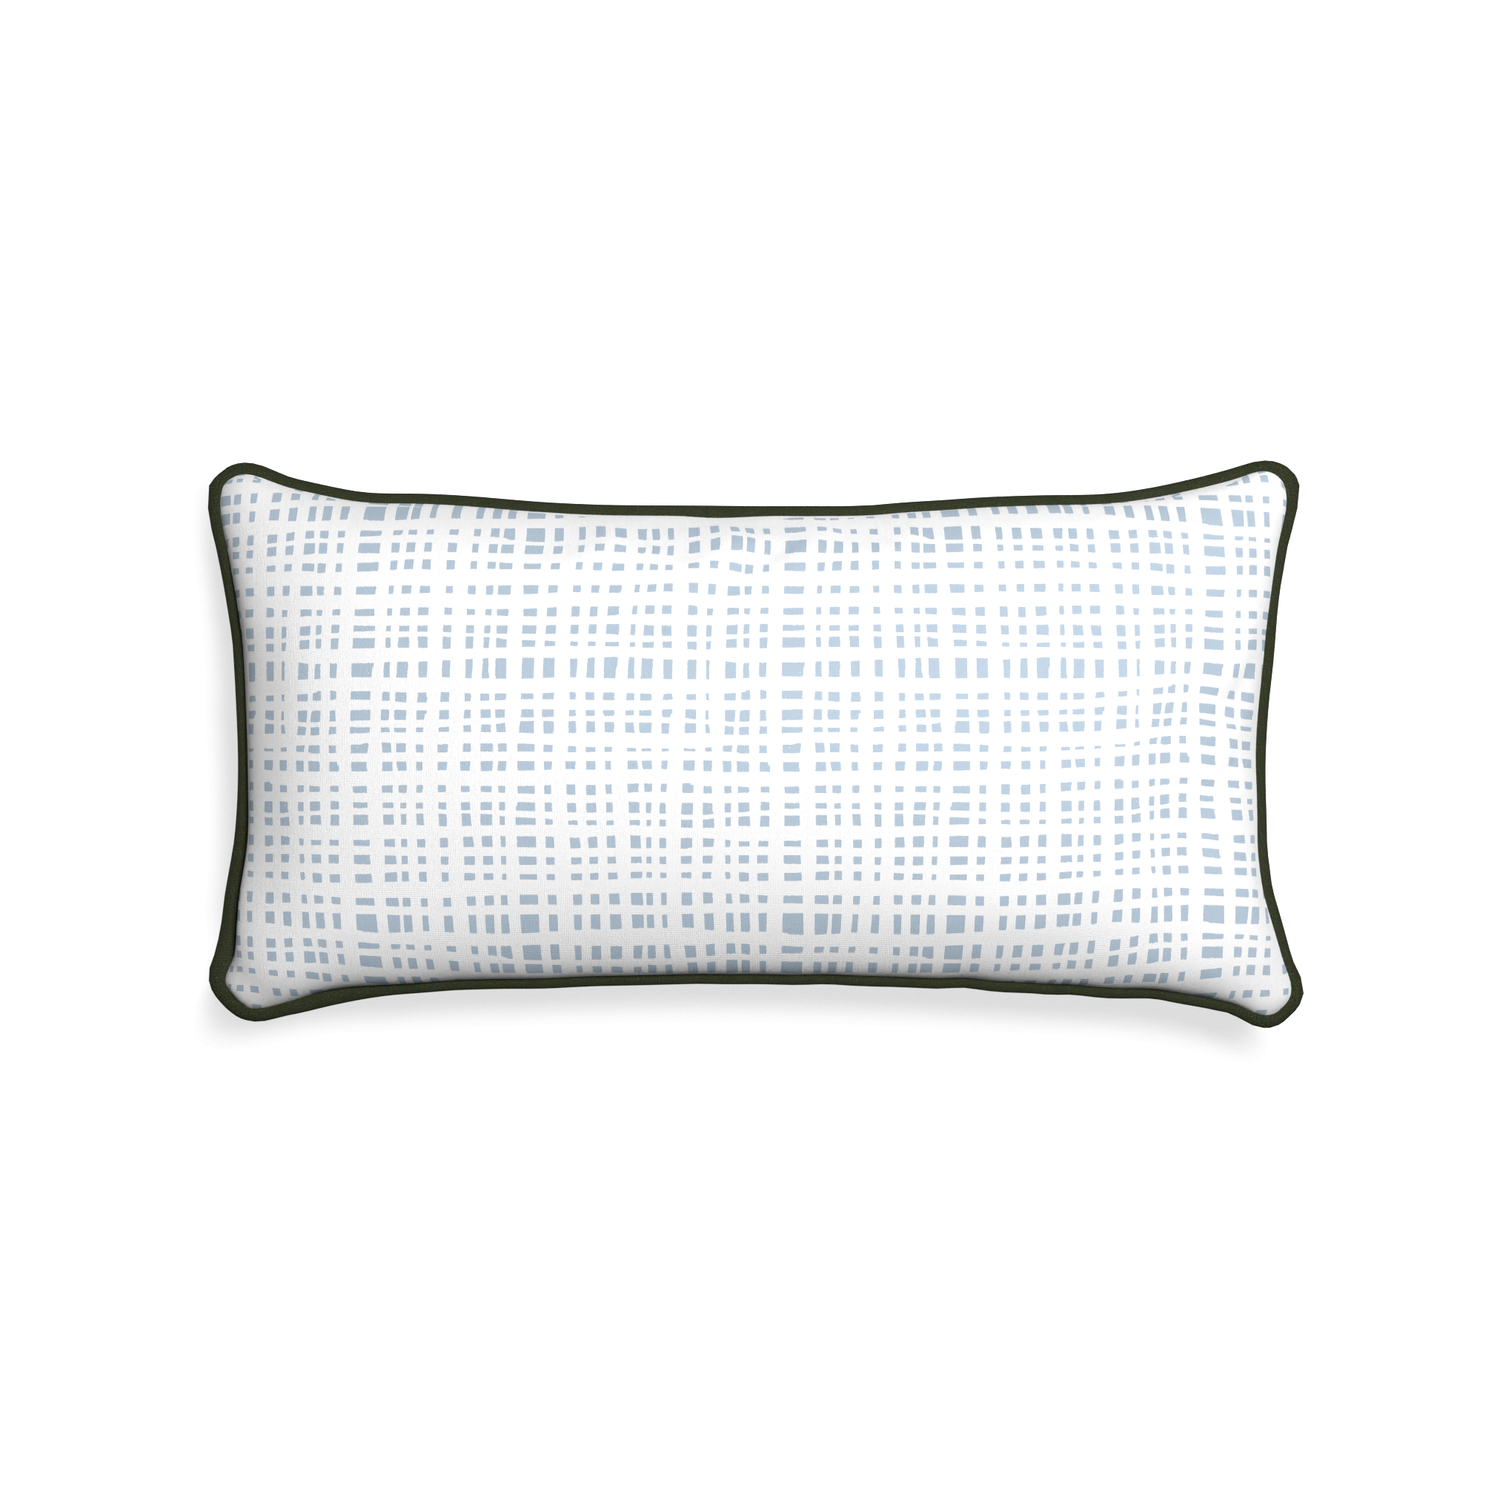 Midi-lumbar ginger sky custom plaid sky bluepillow with f piping on white background